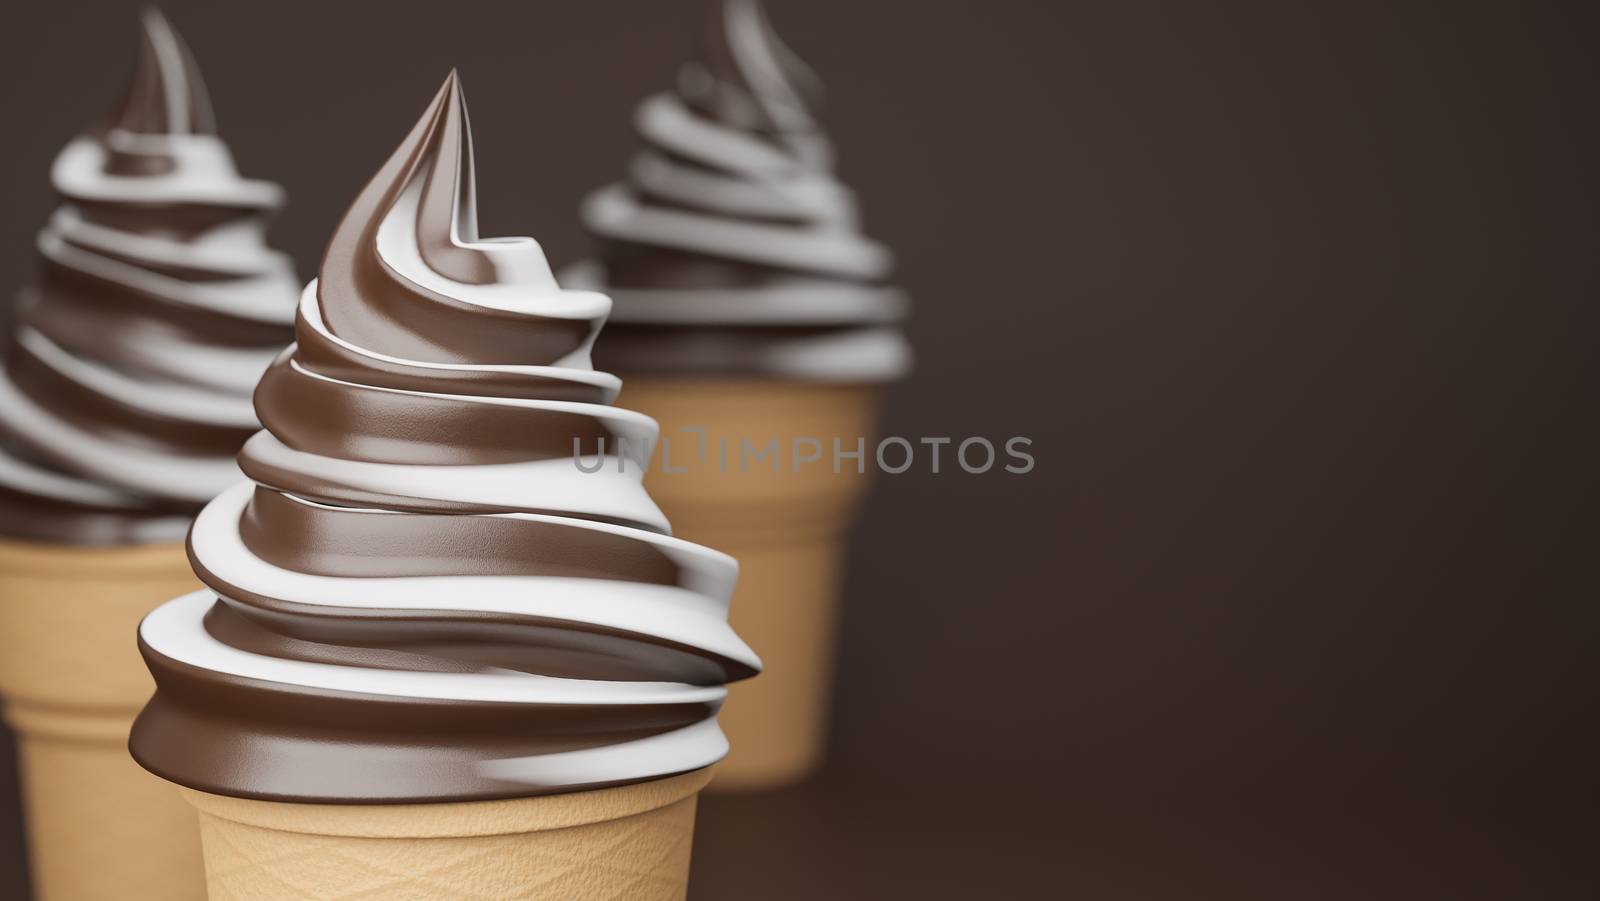 Soft serve ice cream of chocolate and milk flavours on crispy cone on brown background.,3d model and illustration.